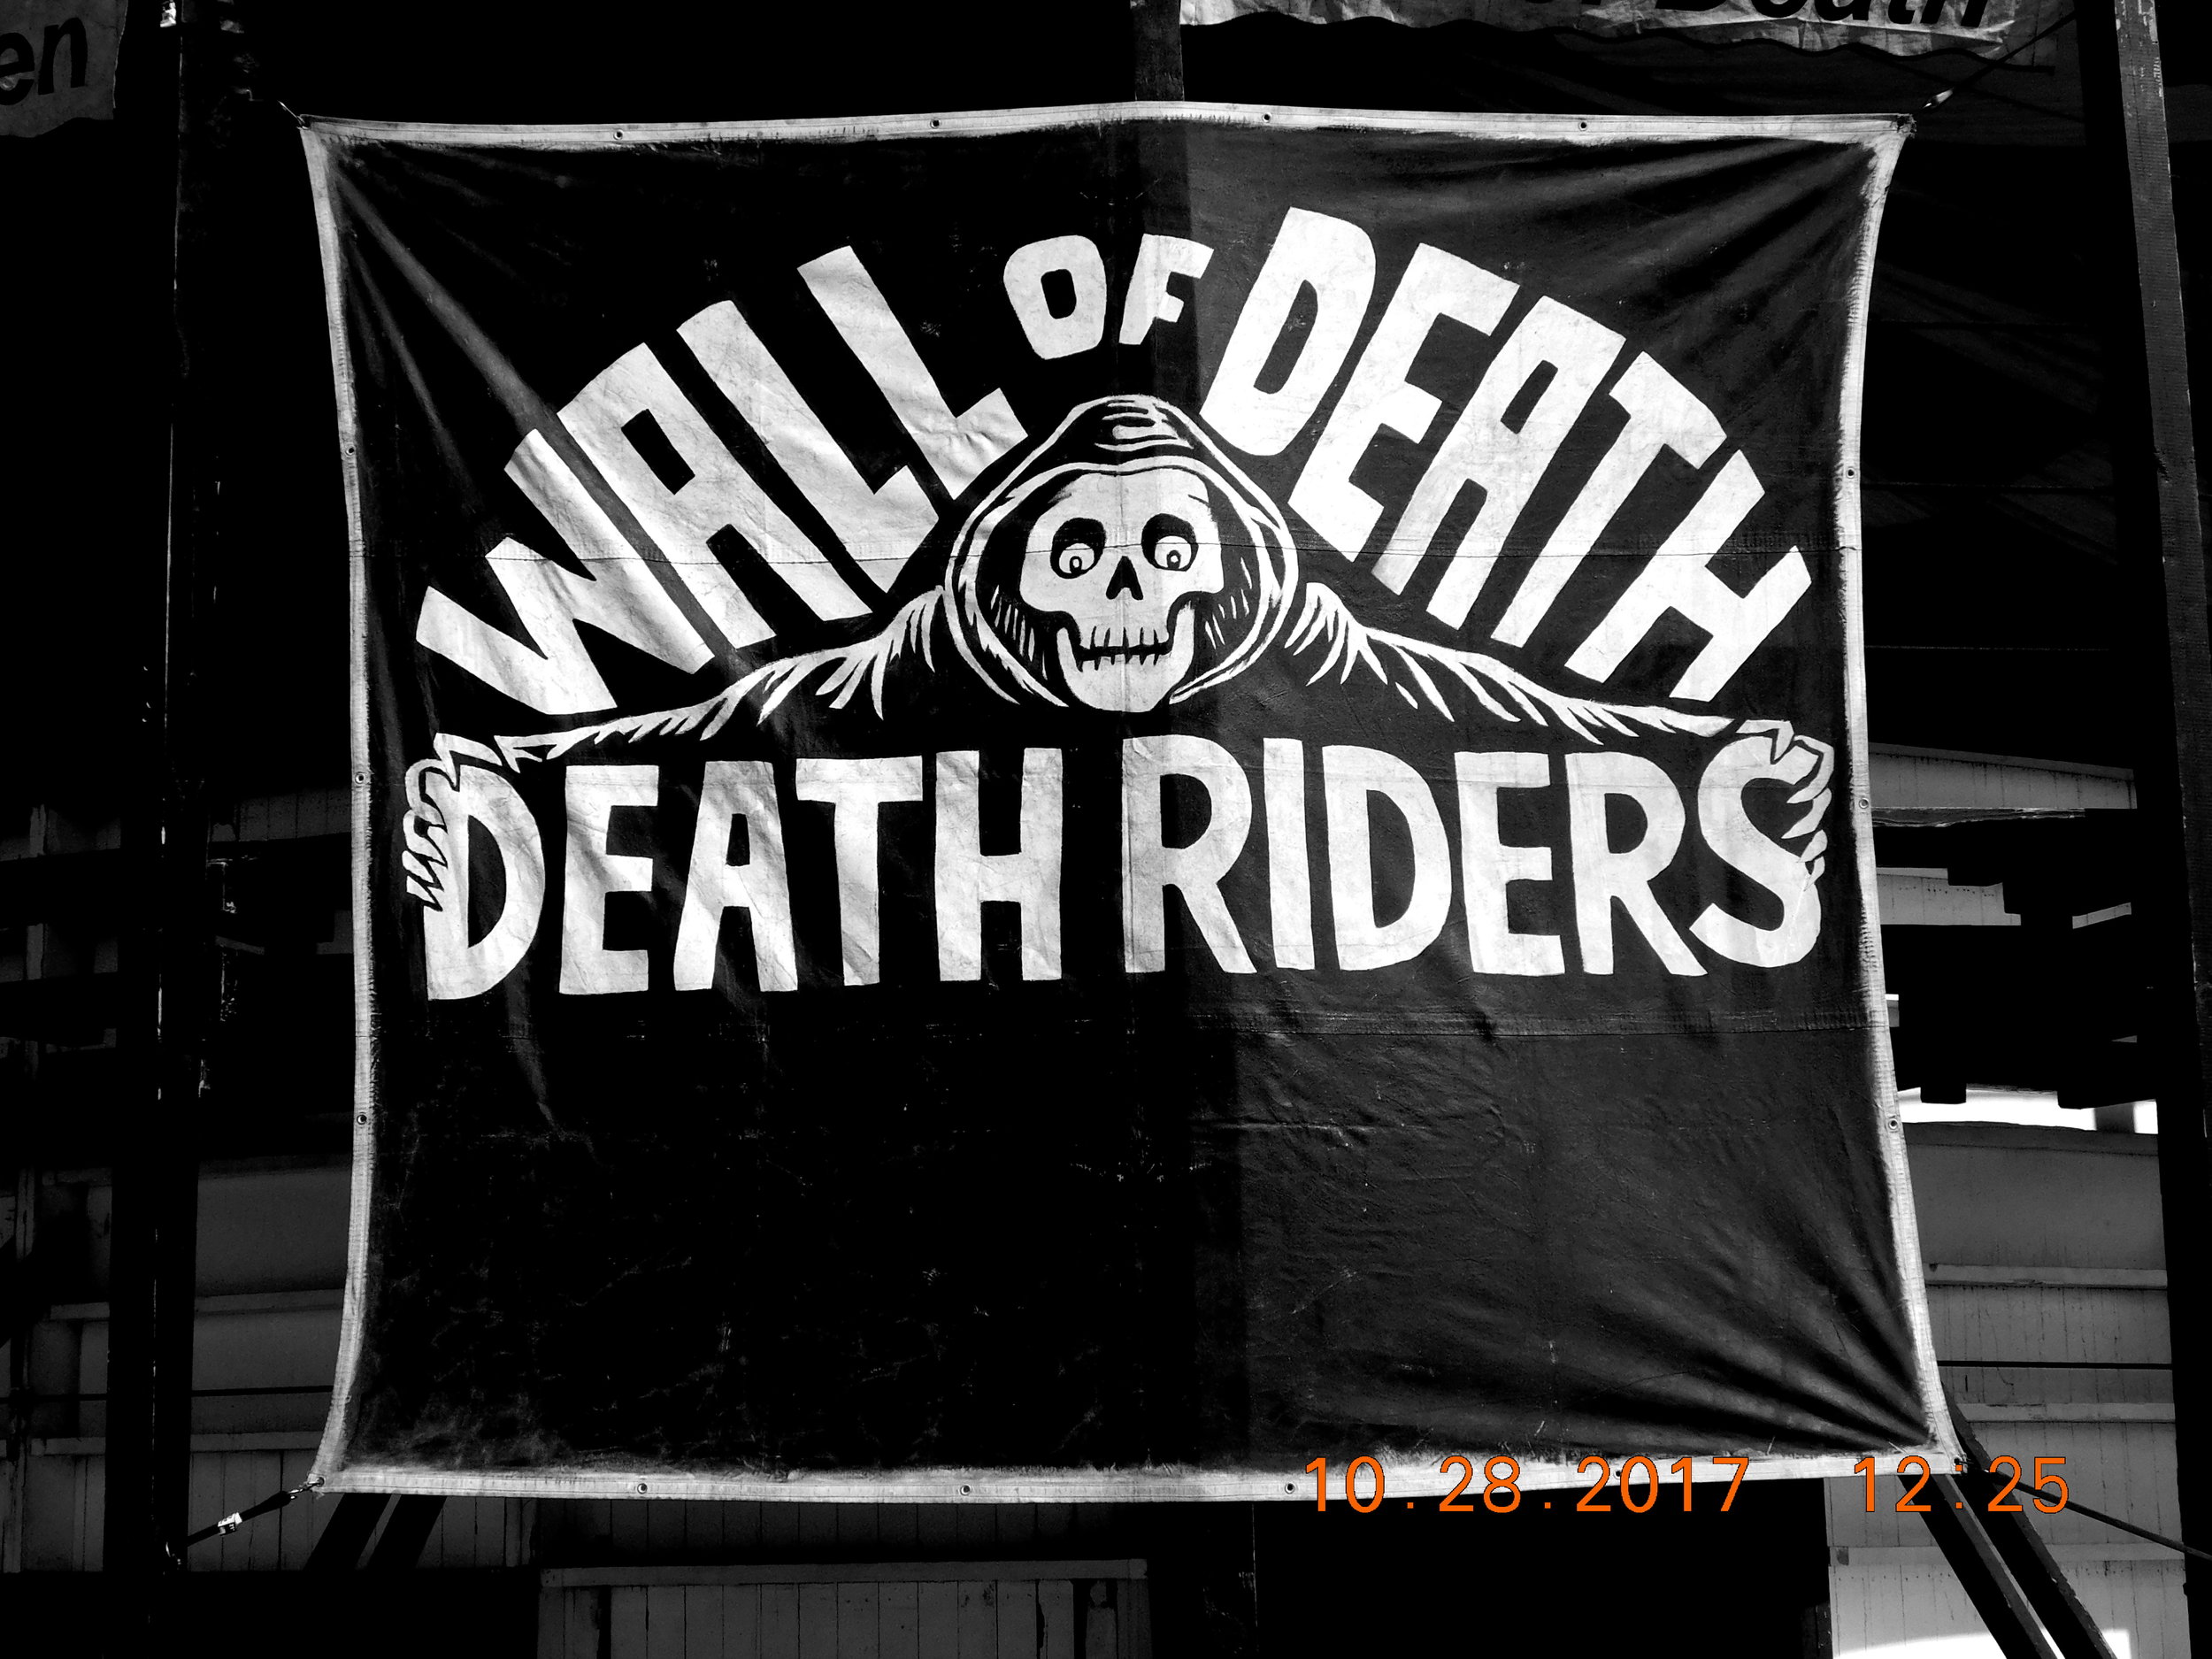  Wall of Death Riders banner 